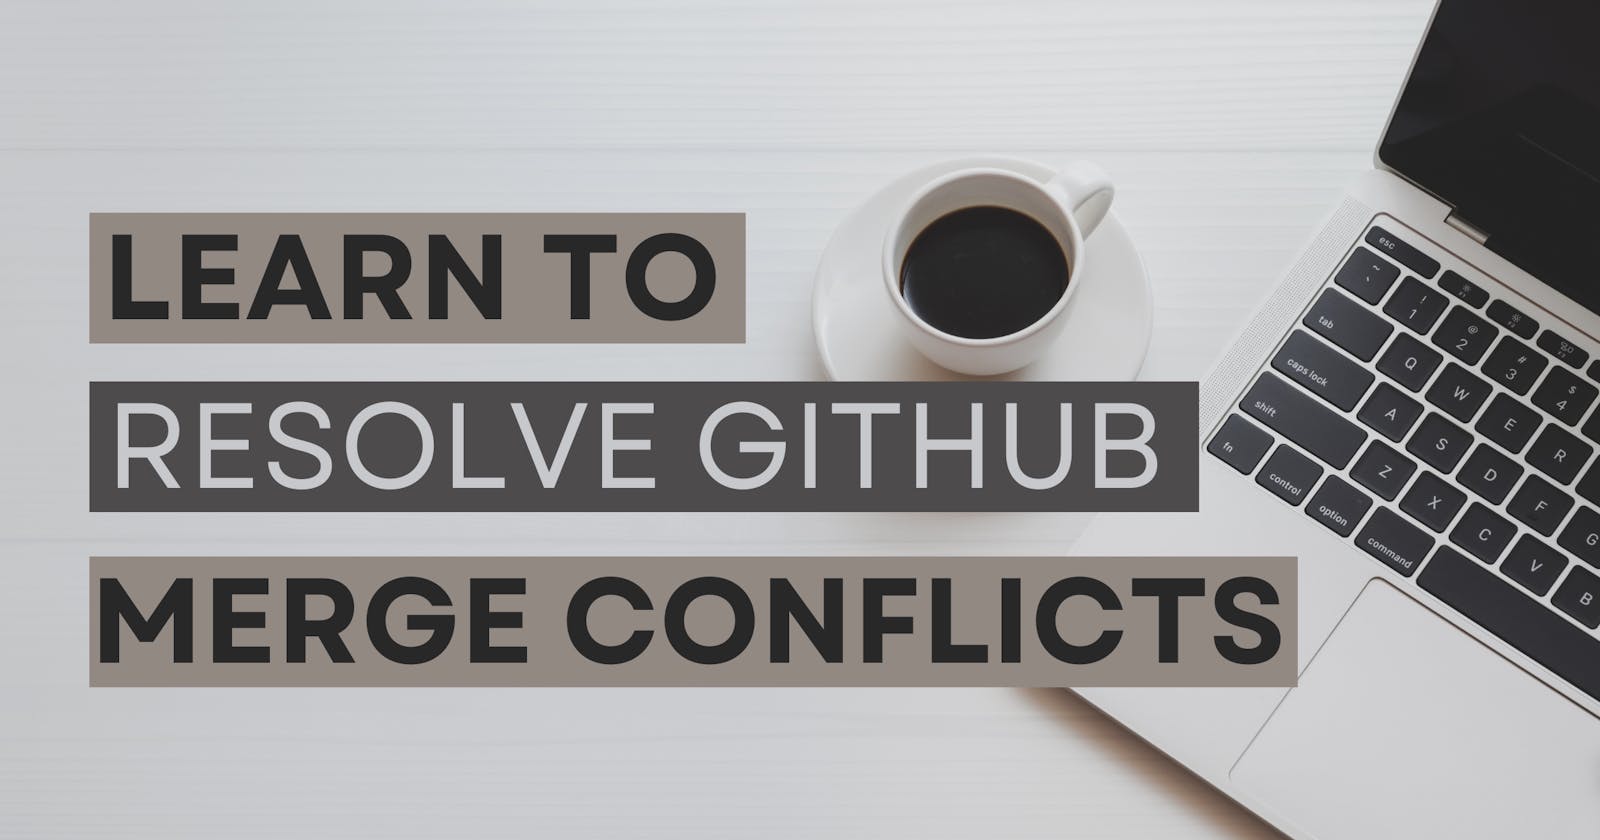 Learn to Resolve GitHub Merge Conflicts: A Step-by-Step Guide